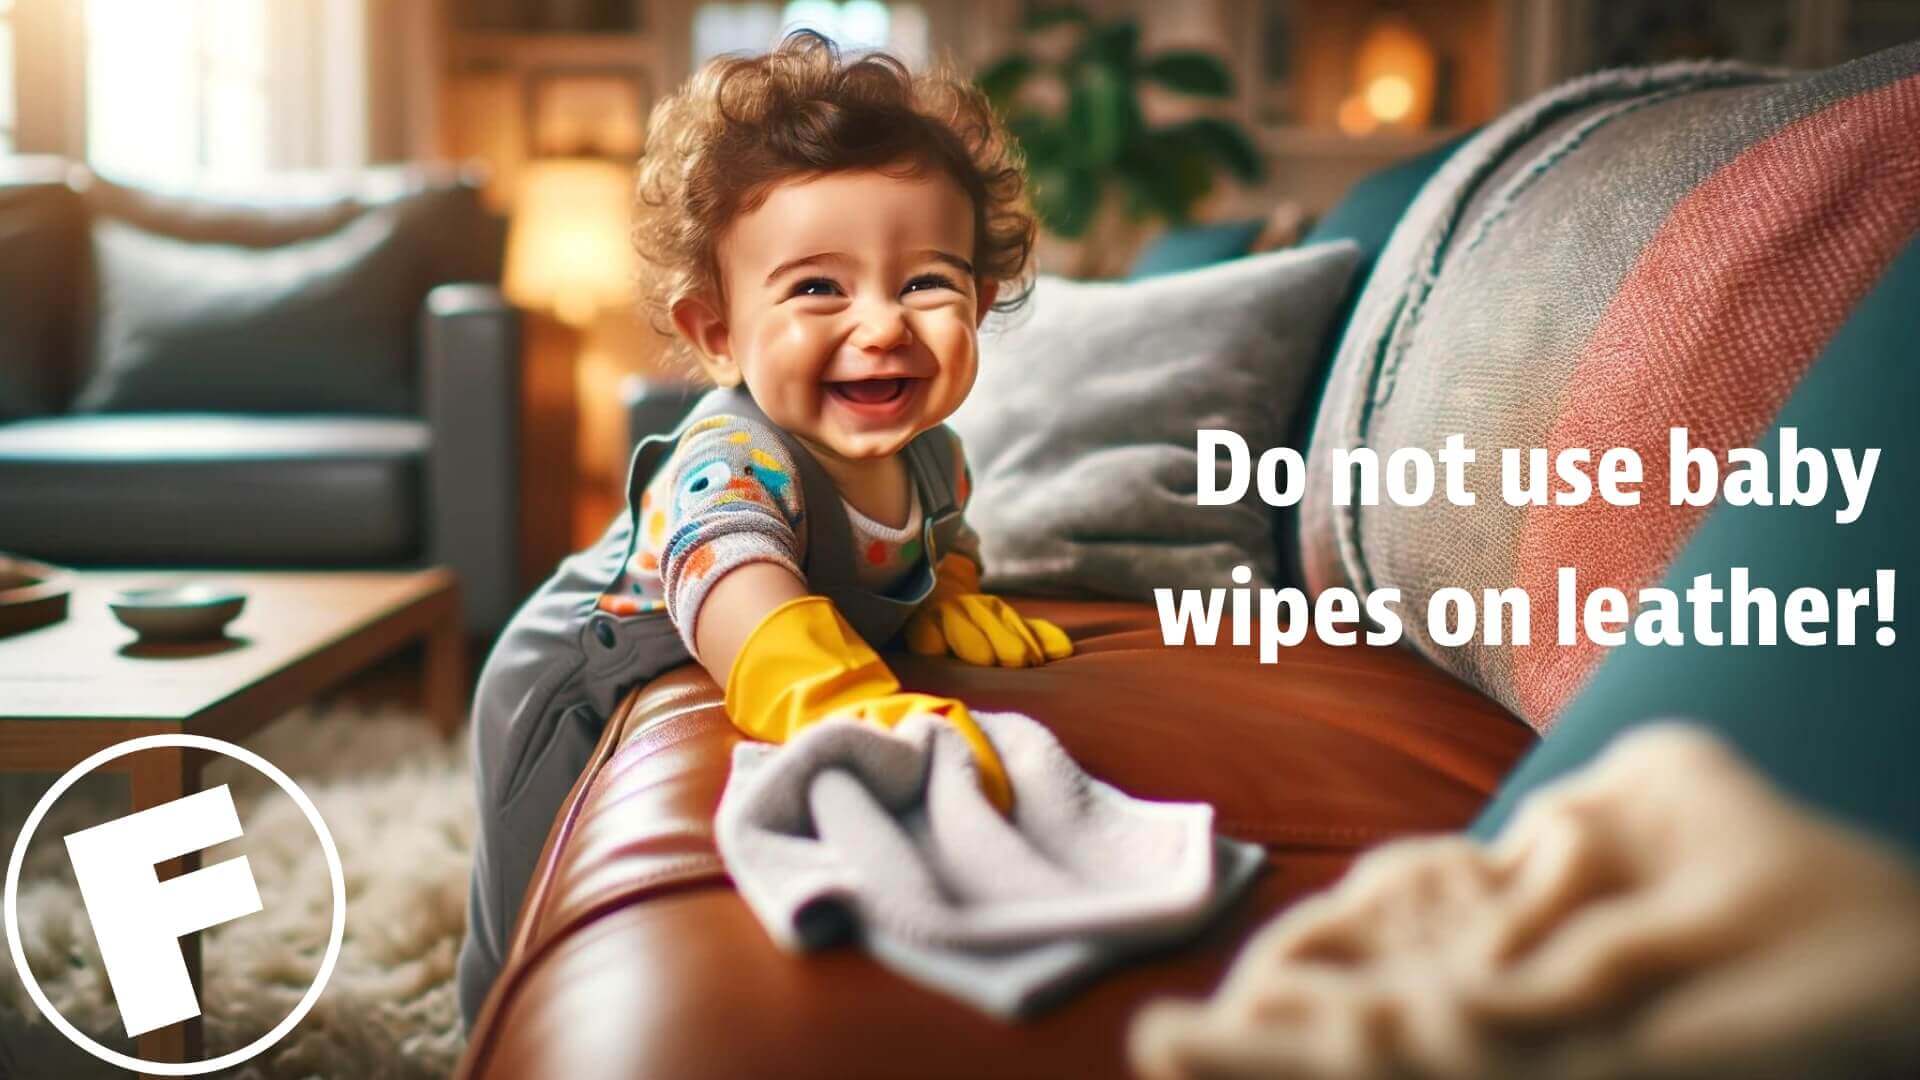 a cheeky baby cleaning a leather couch